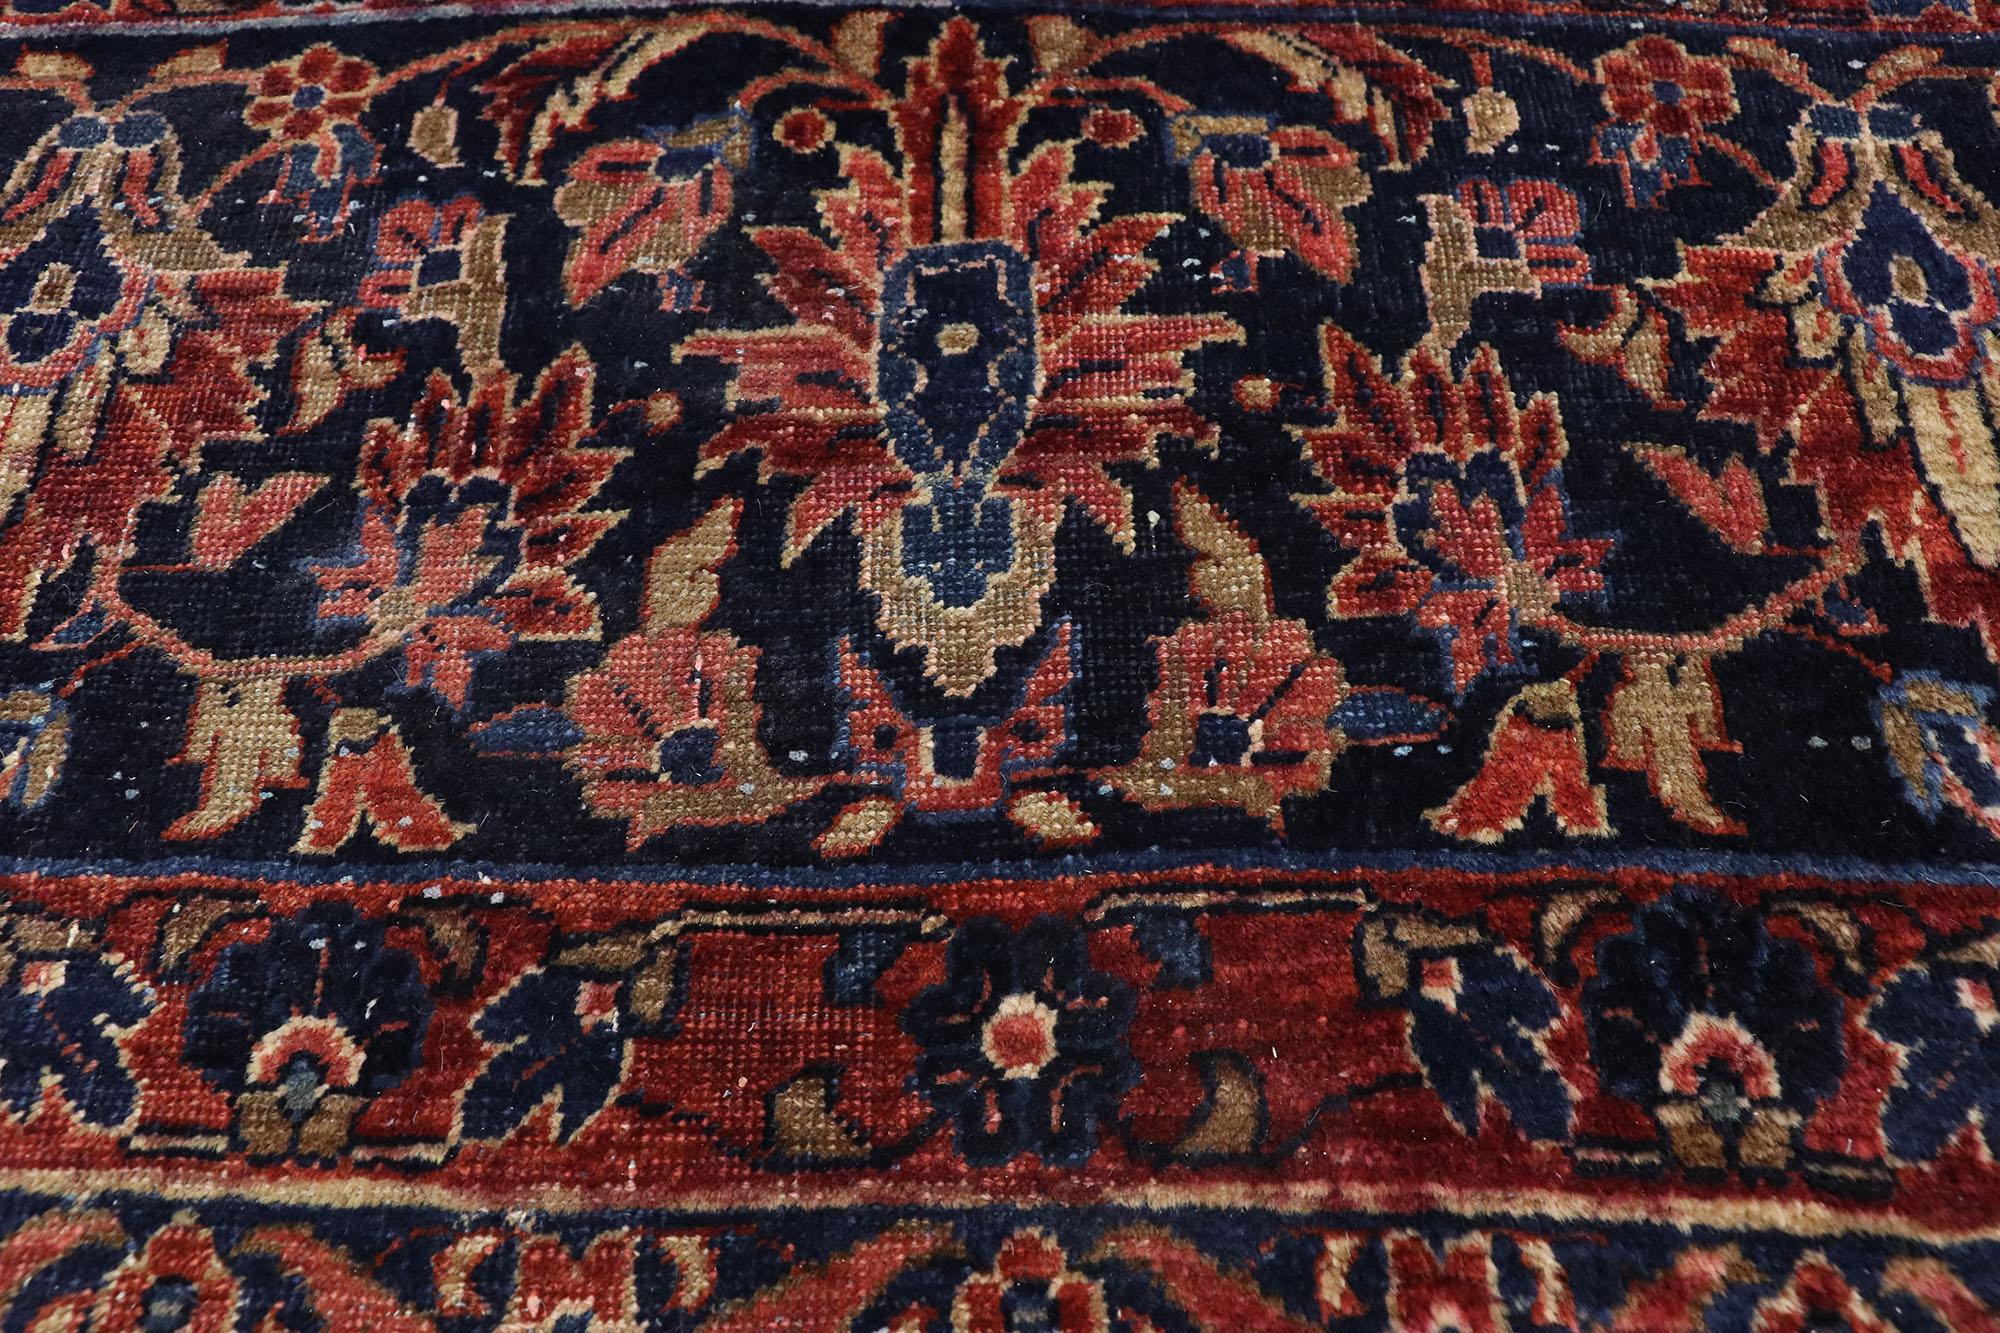 Hand-Knotted Distressed Antique Persian Sarouk Area Rug with Modern English Tudor Style